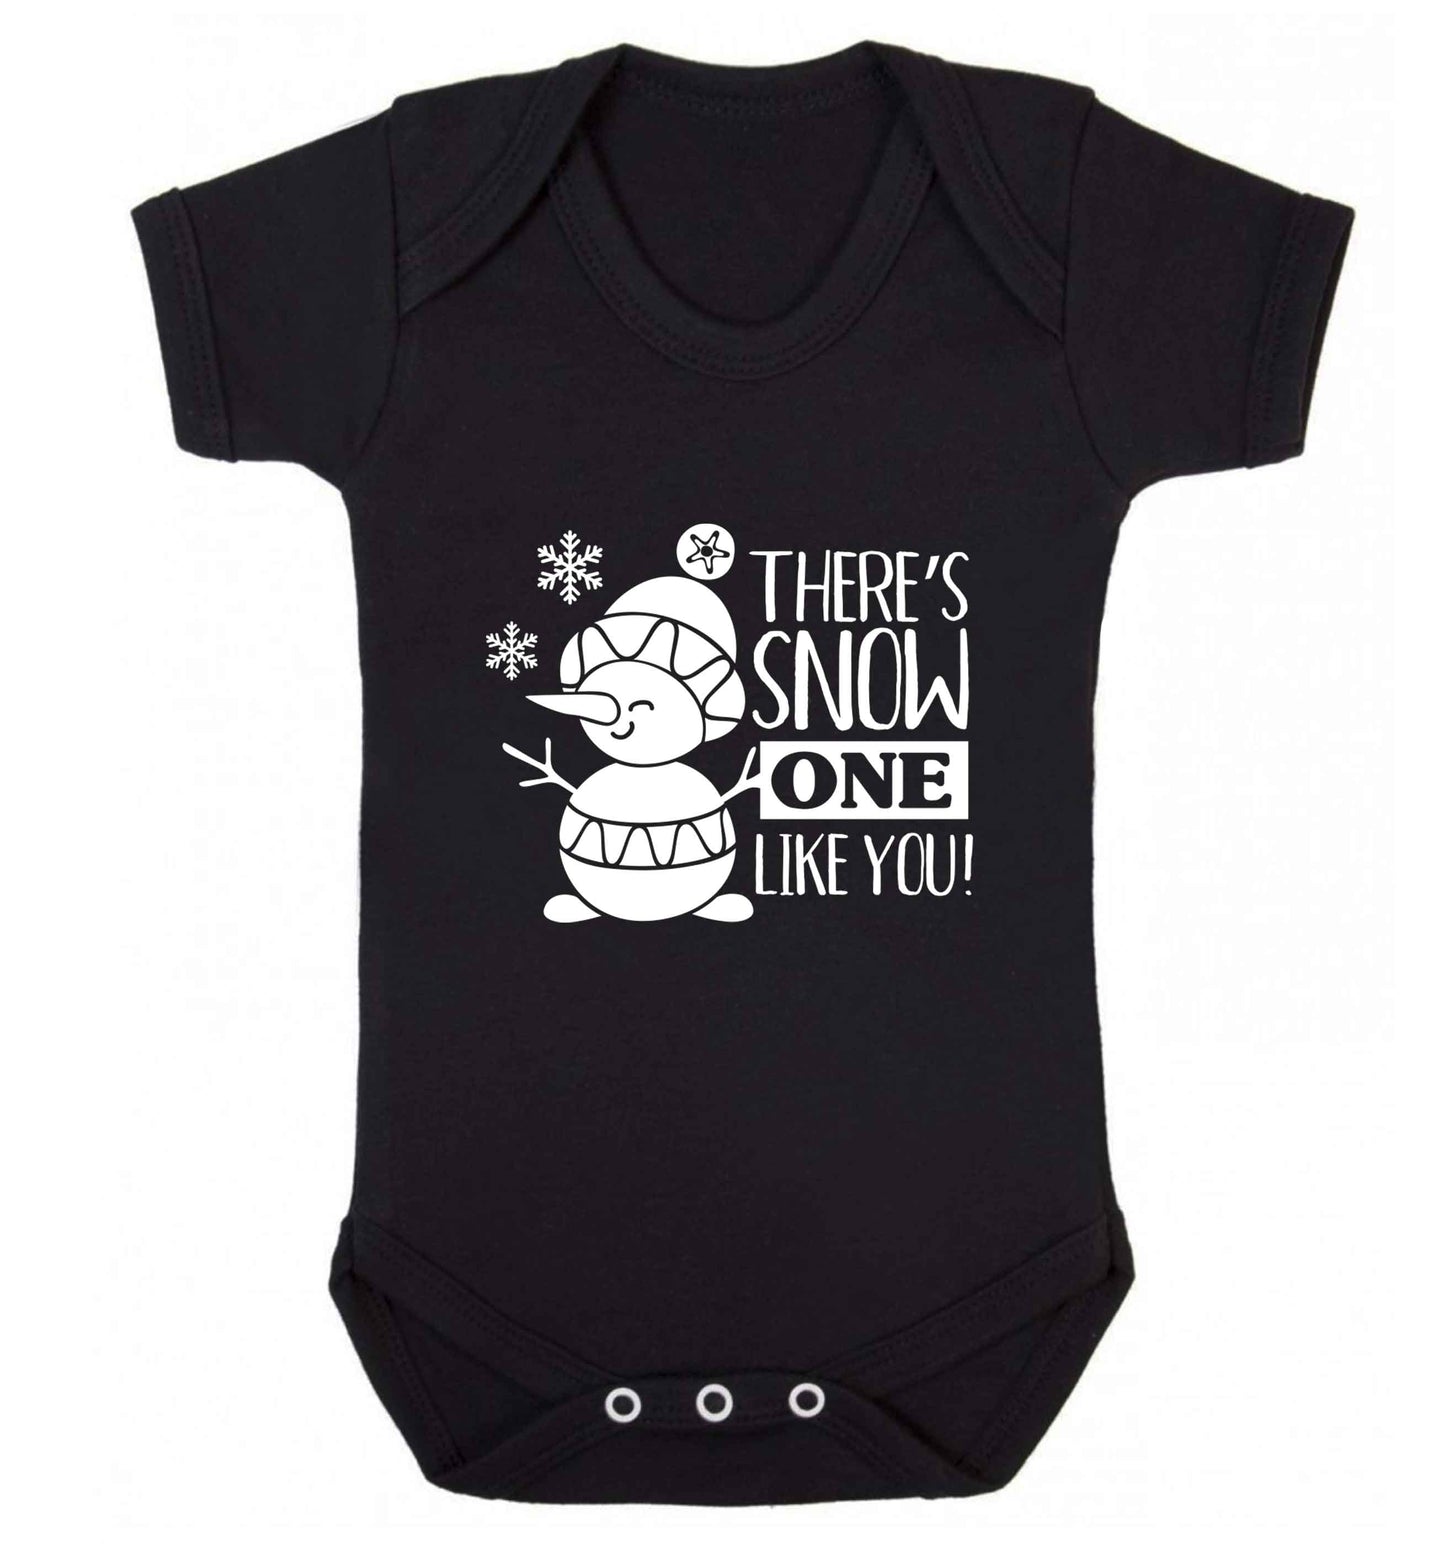 There's snow one like you baby vest black 18-24 months